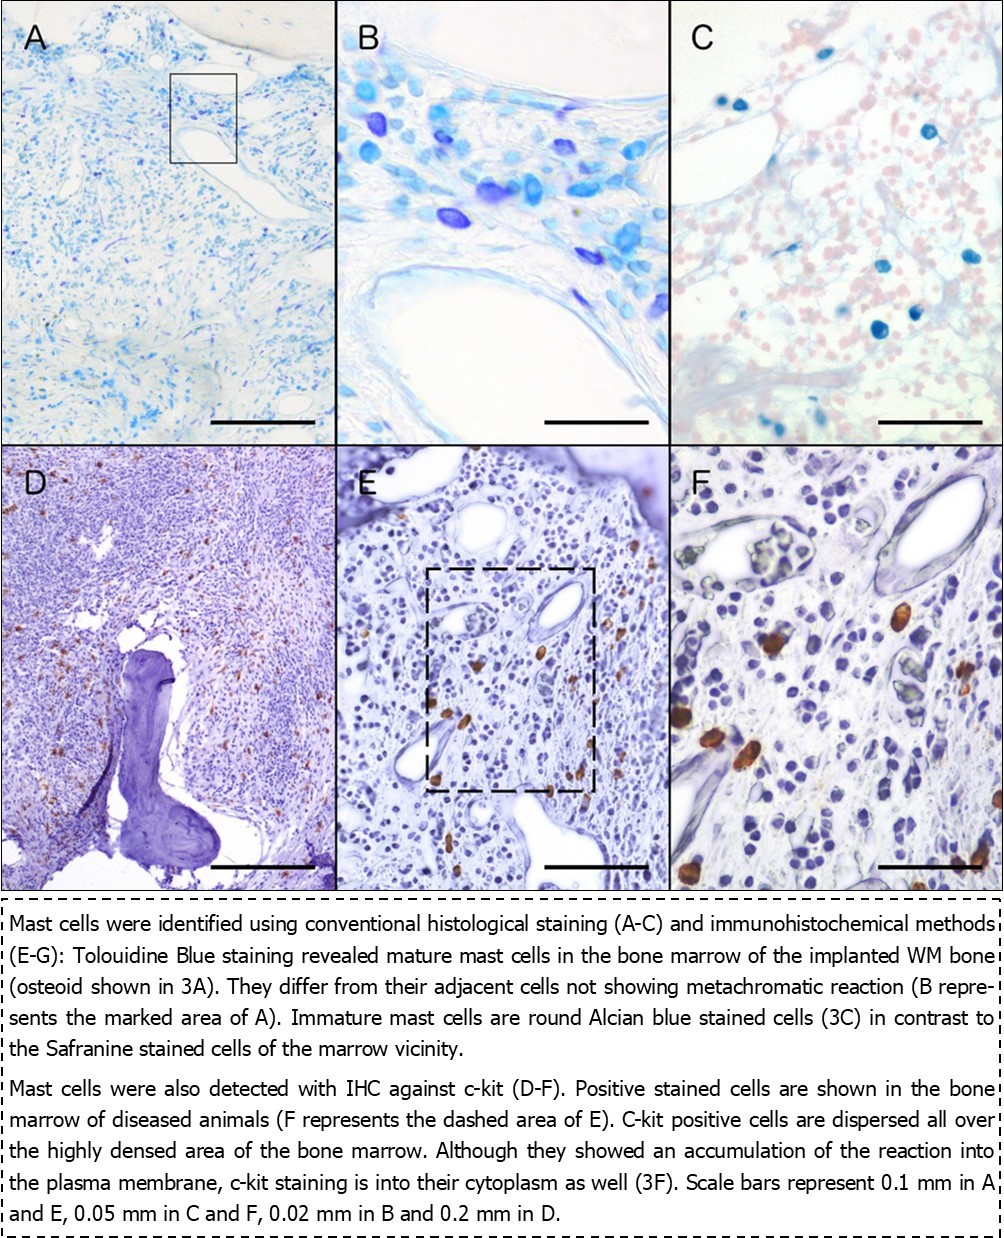  Histological (A-C) and immunohistochemical (D-F) staining of mast cells in WM biopsies.